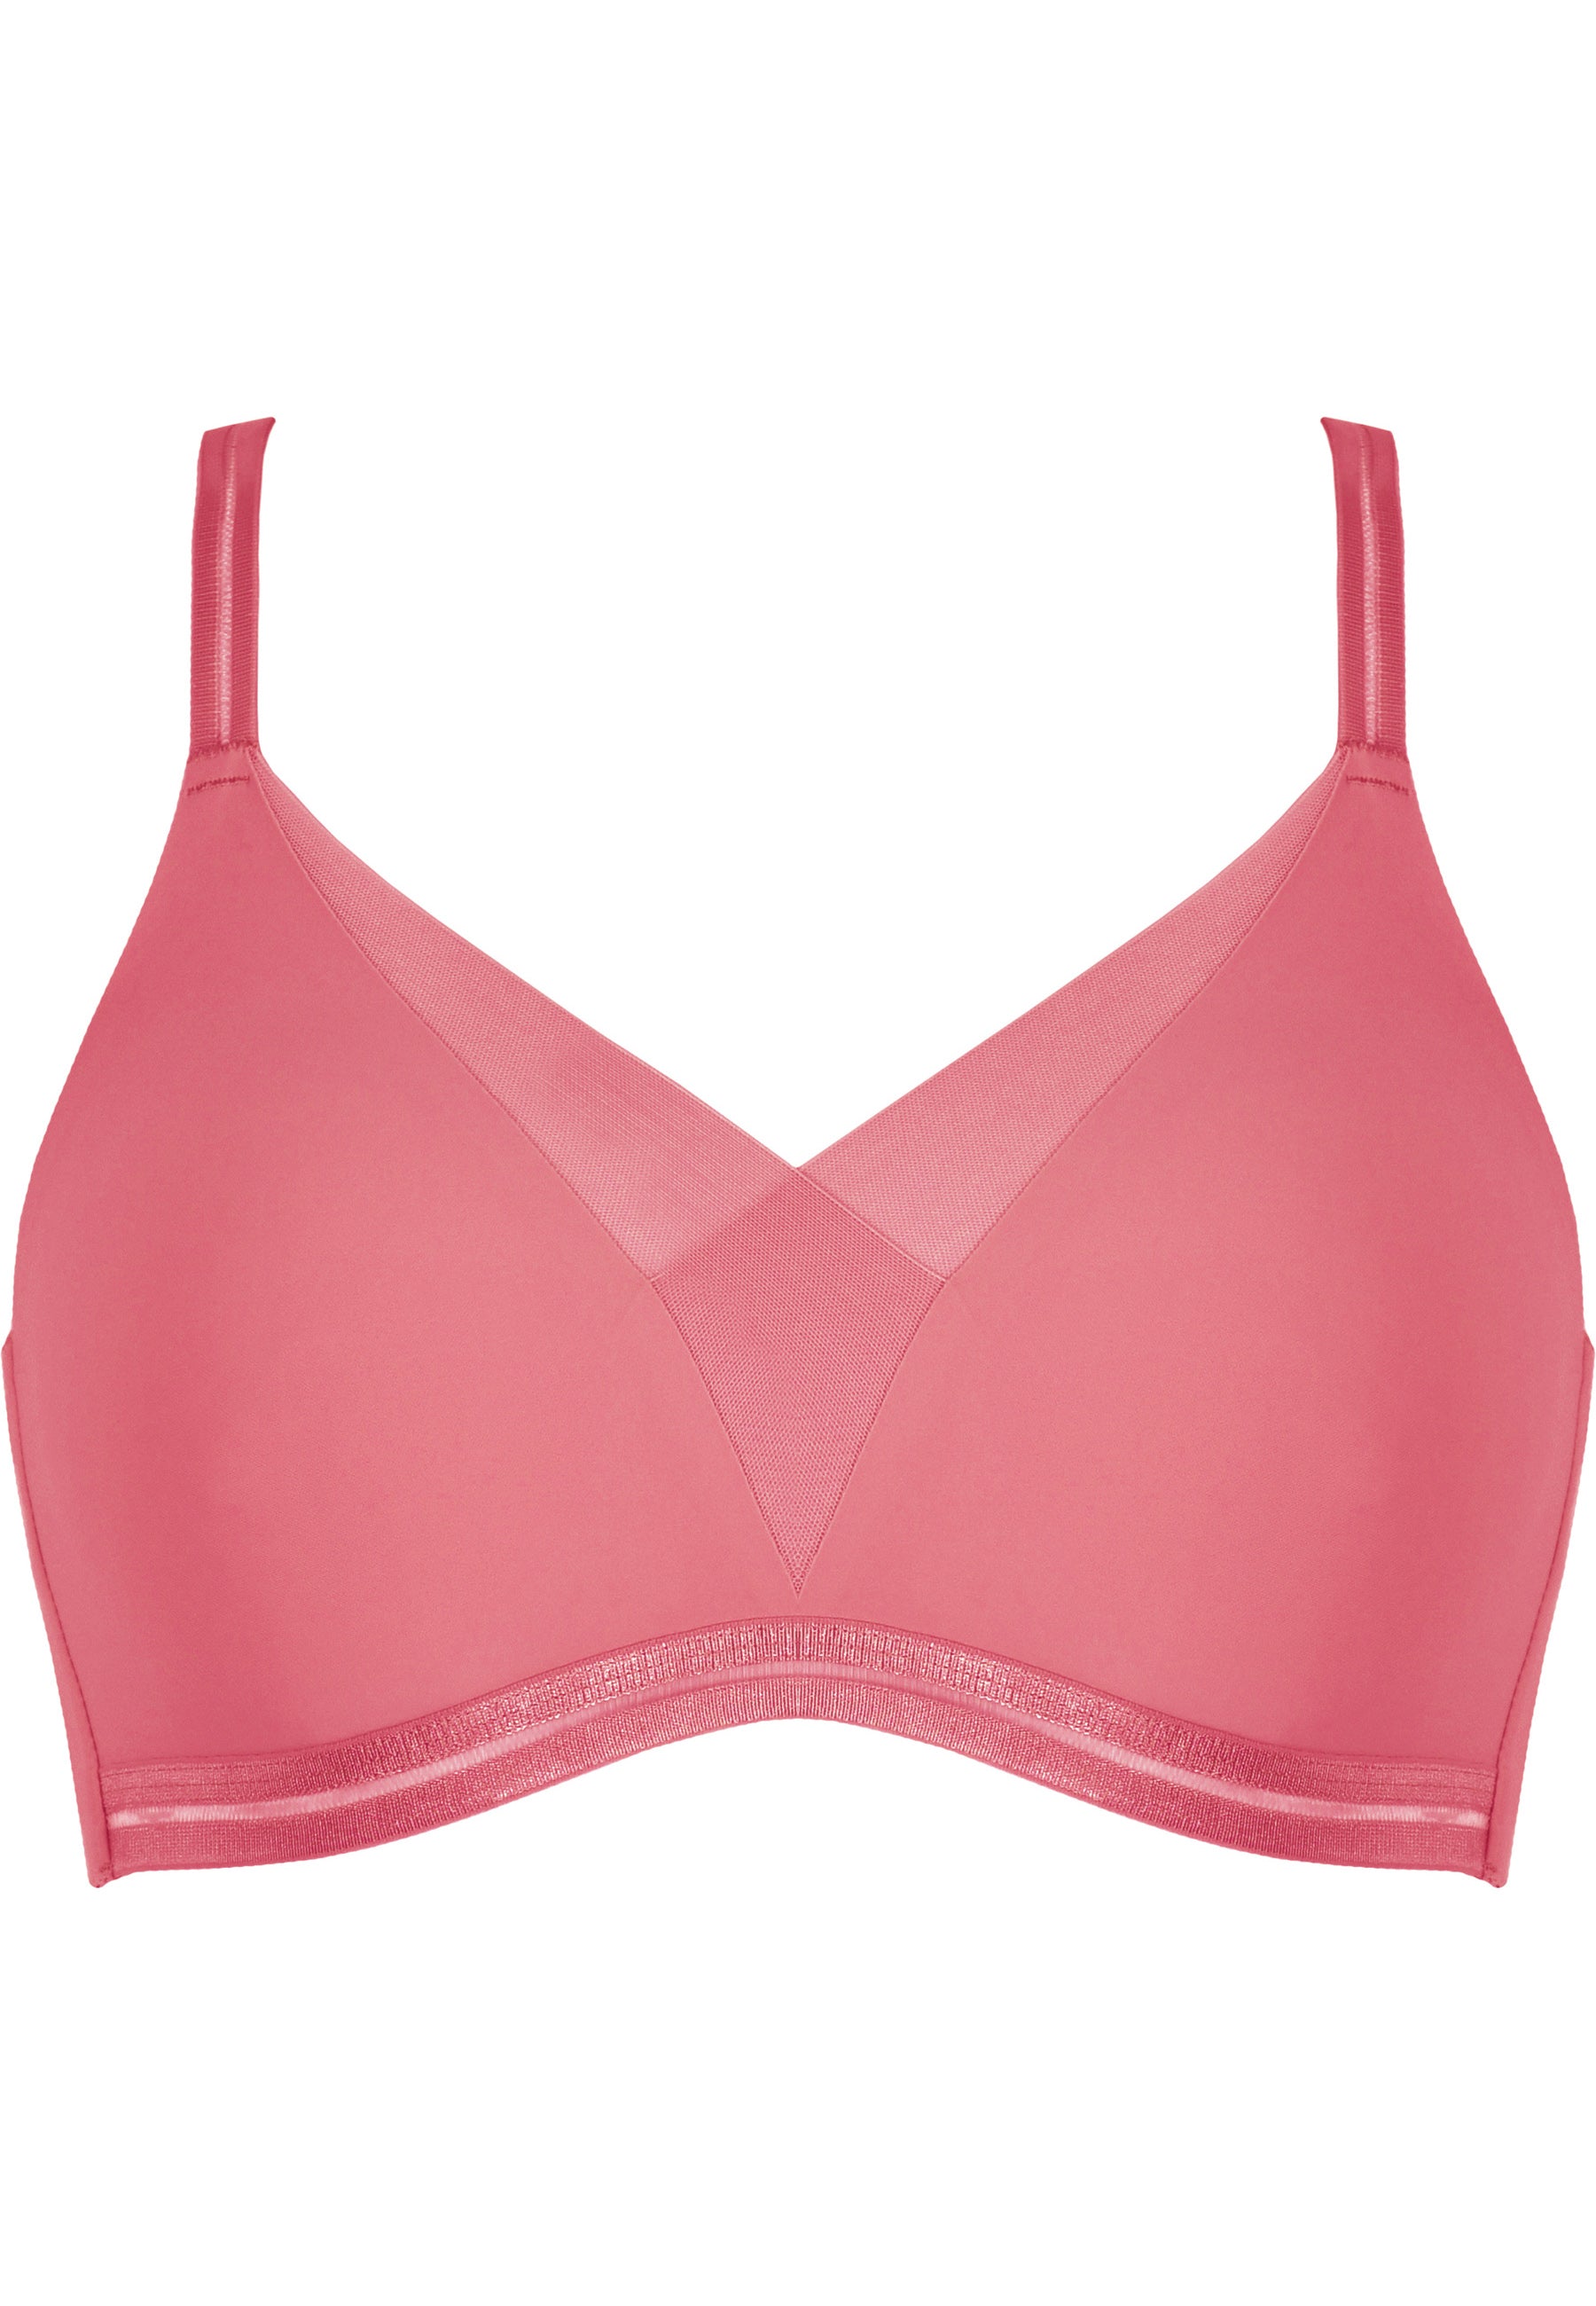 Soft Feel-Good Bra with Mesh Detail - Raspberry Mousse